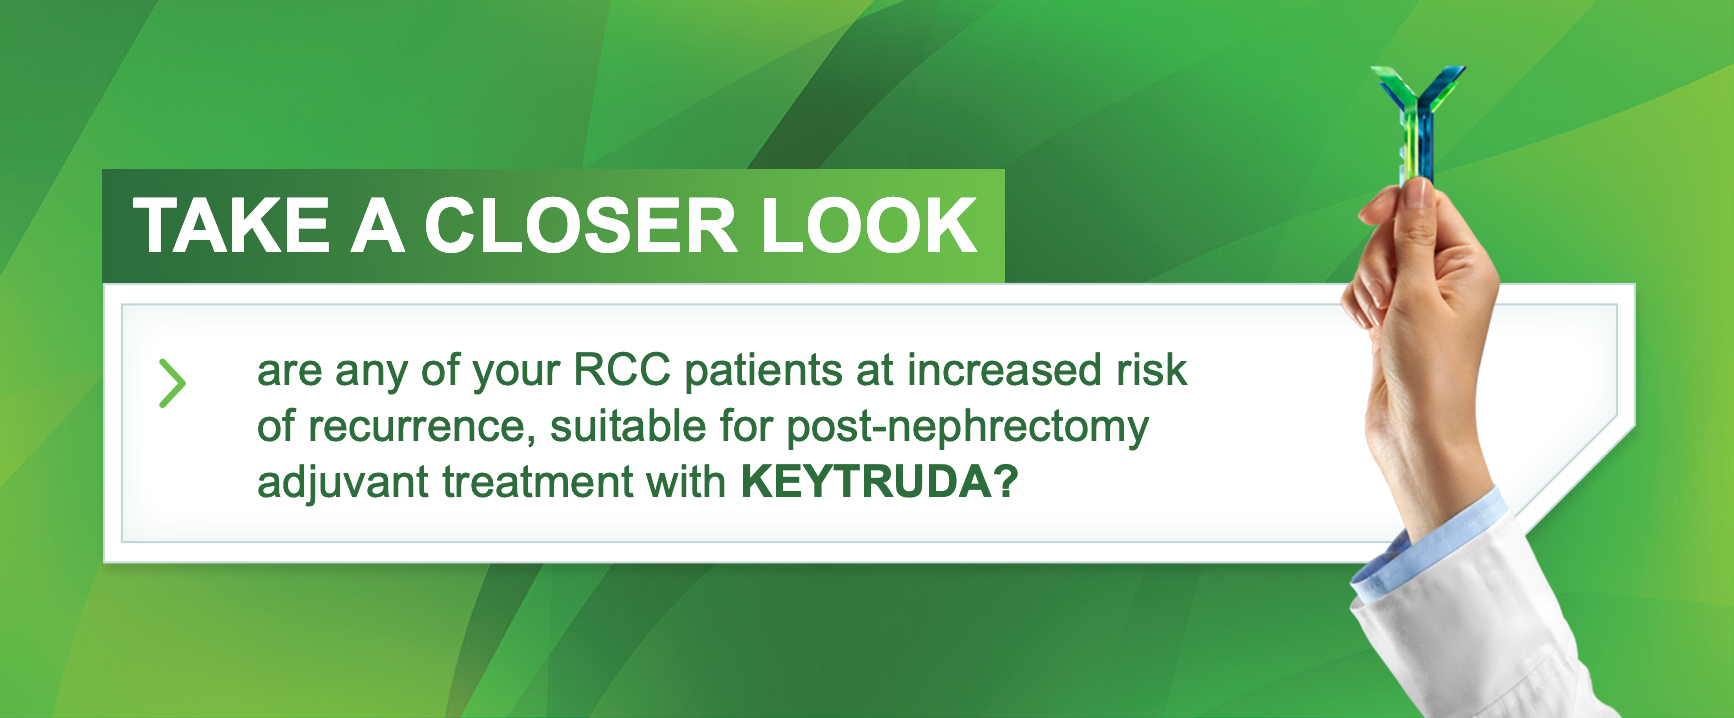 Take a closer look: are any of your RCC patients at increased risk of recurrence, suitable for post-nephrectomy adjuvant treatment with KEYTRUDA?